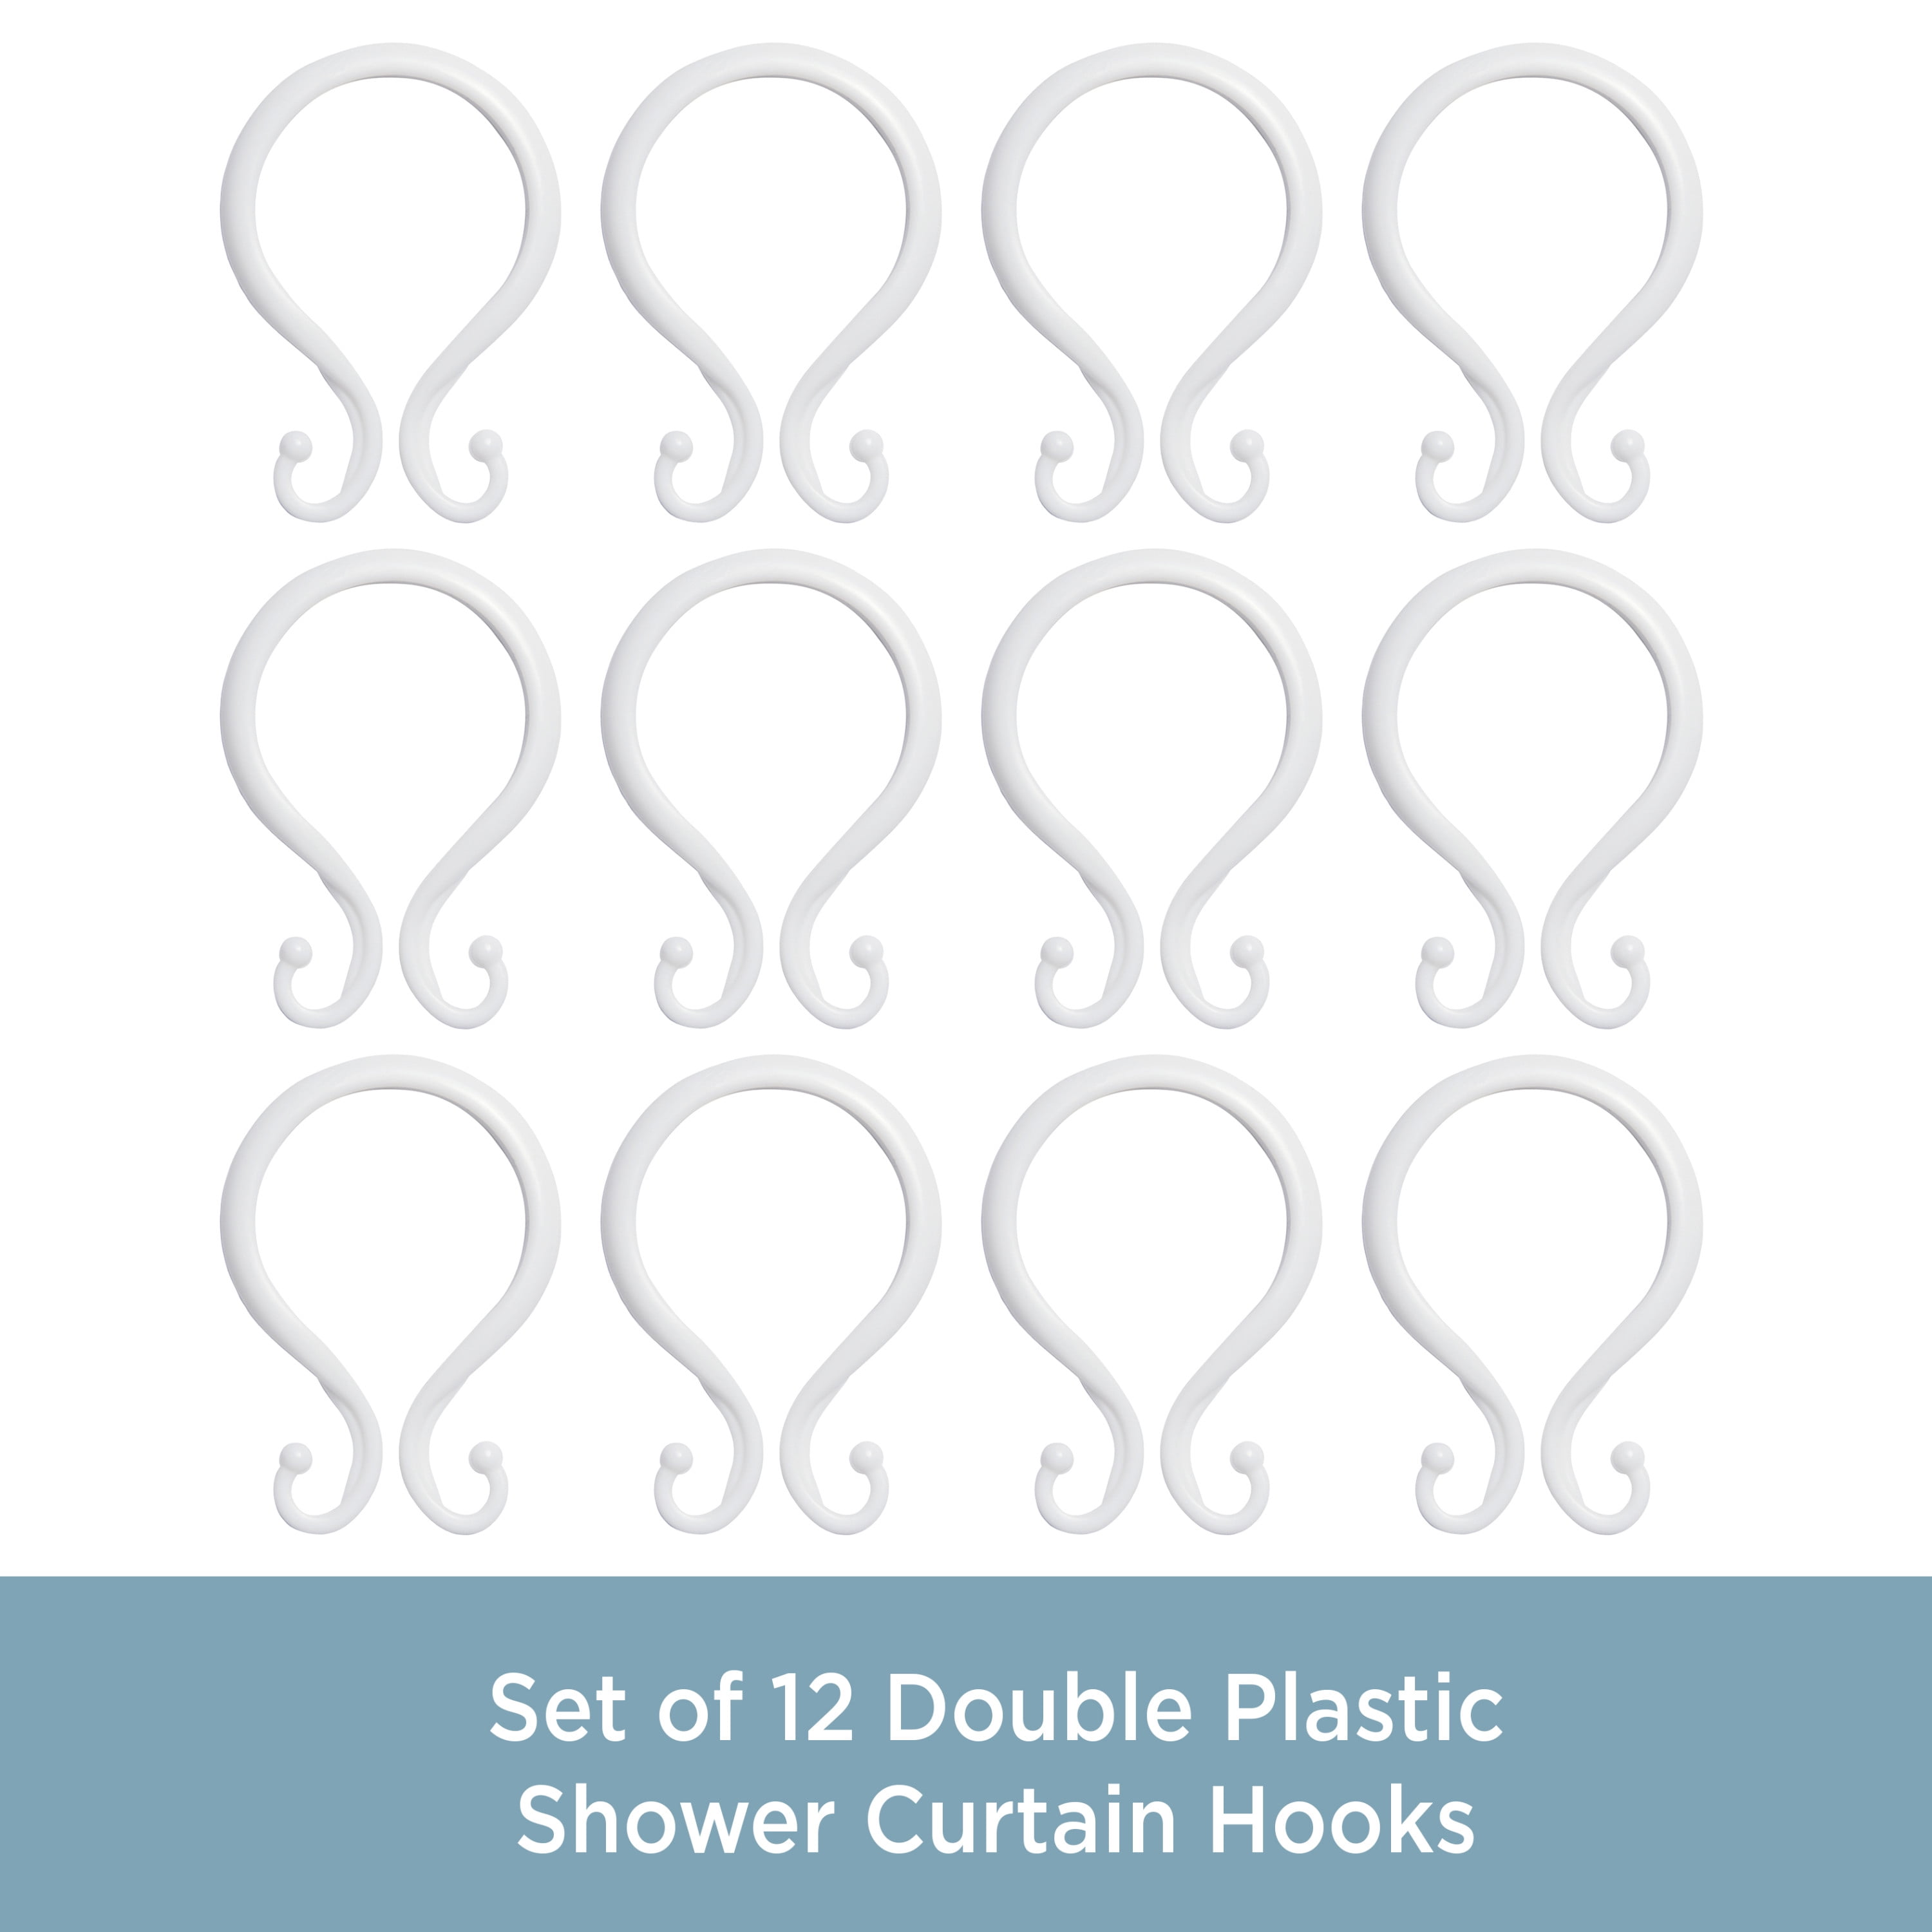 Kenney Rust-Proof Plastic Shower Curtain Double Hooks, Set of 12